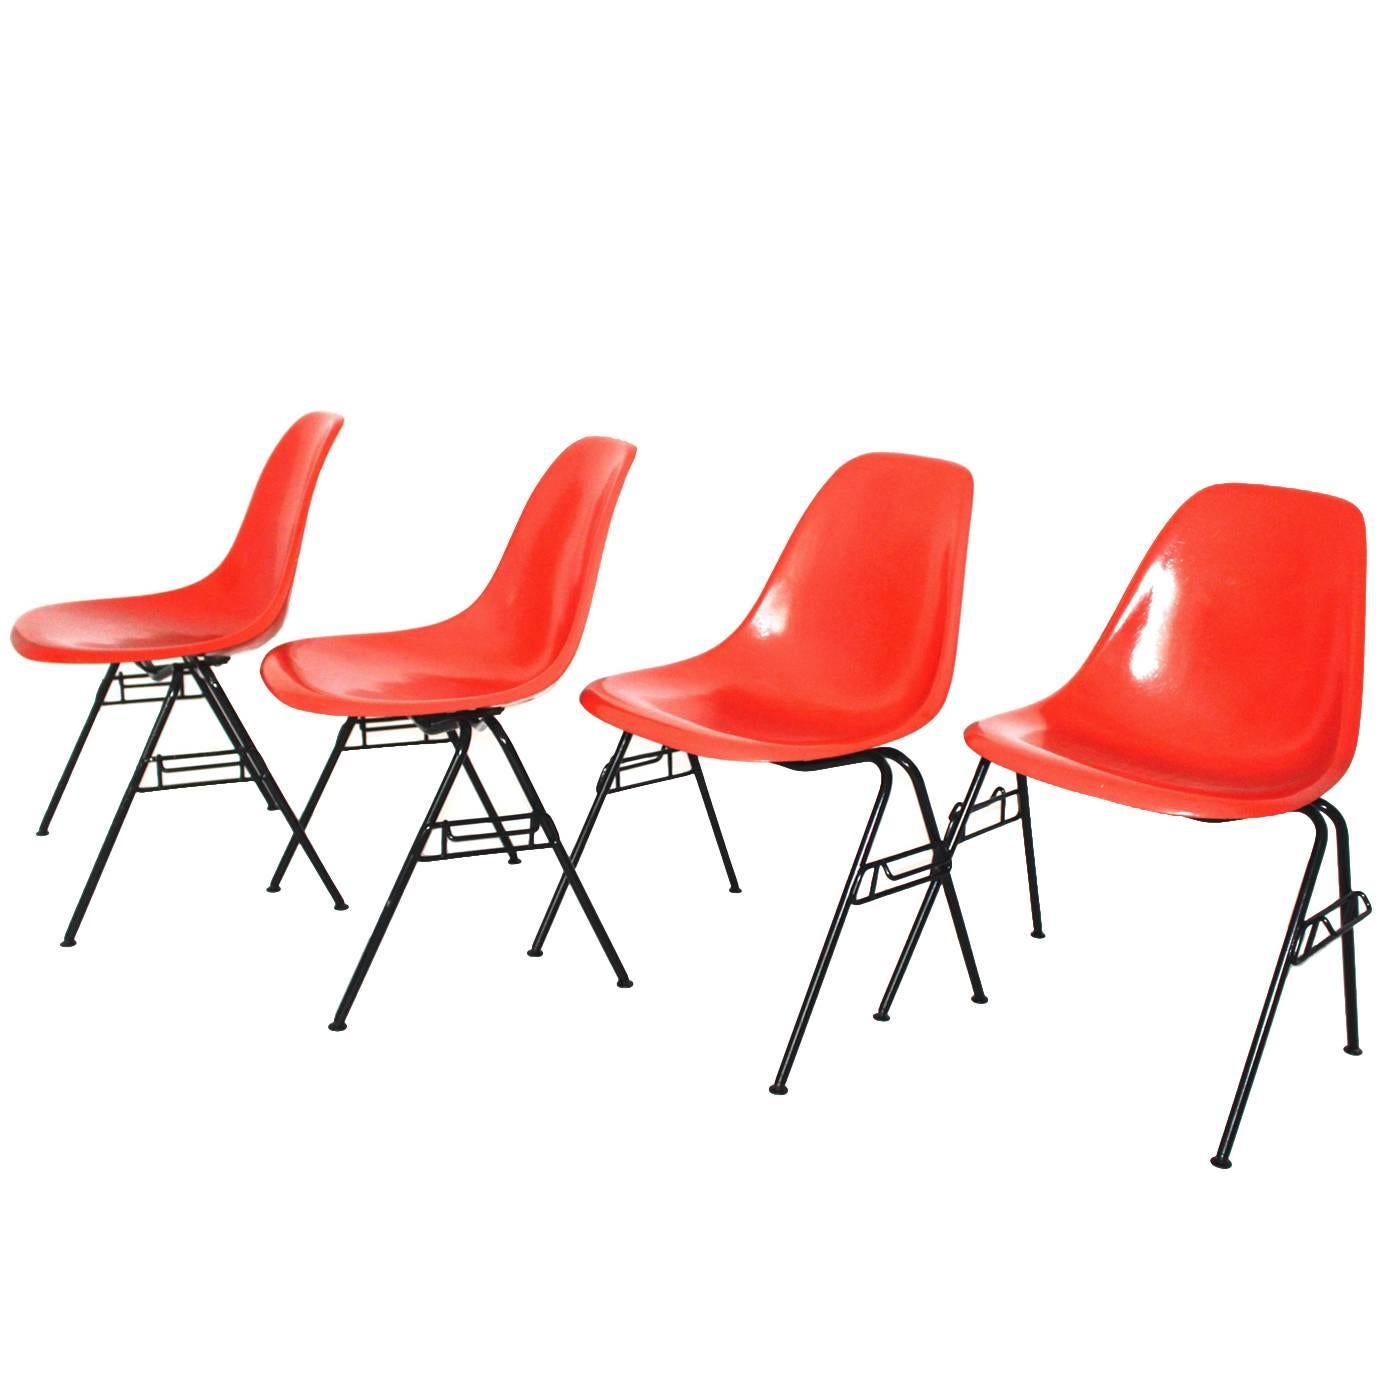 Mid Century Modern Orange Vintage Dining Chairs Charles Ray Eames Chairs 1950s  For Sale